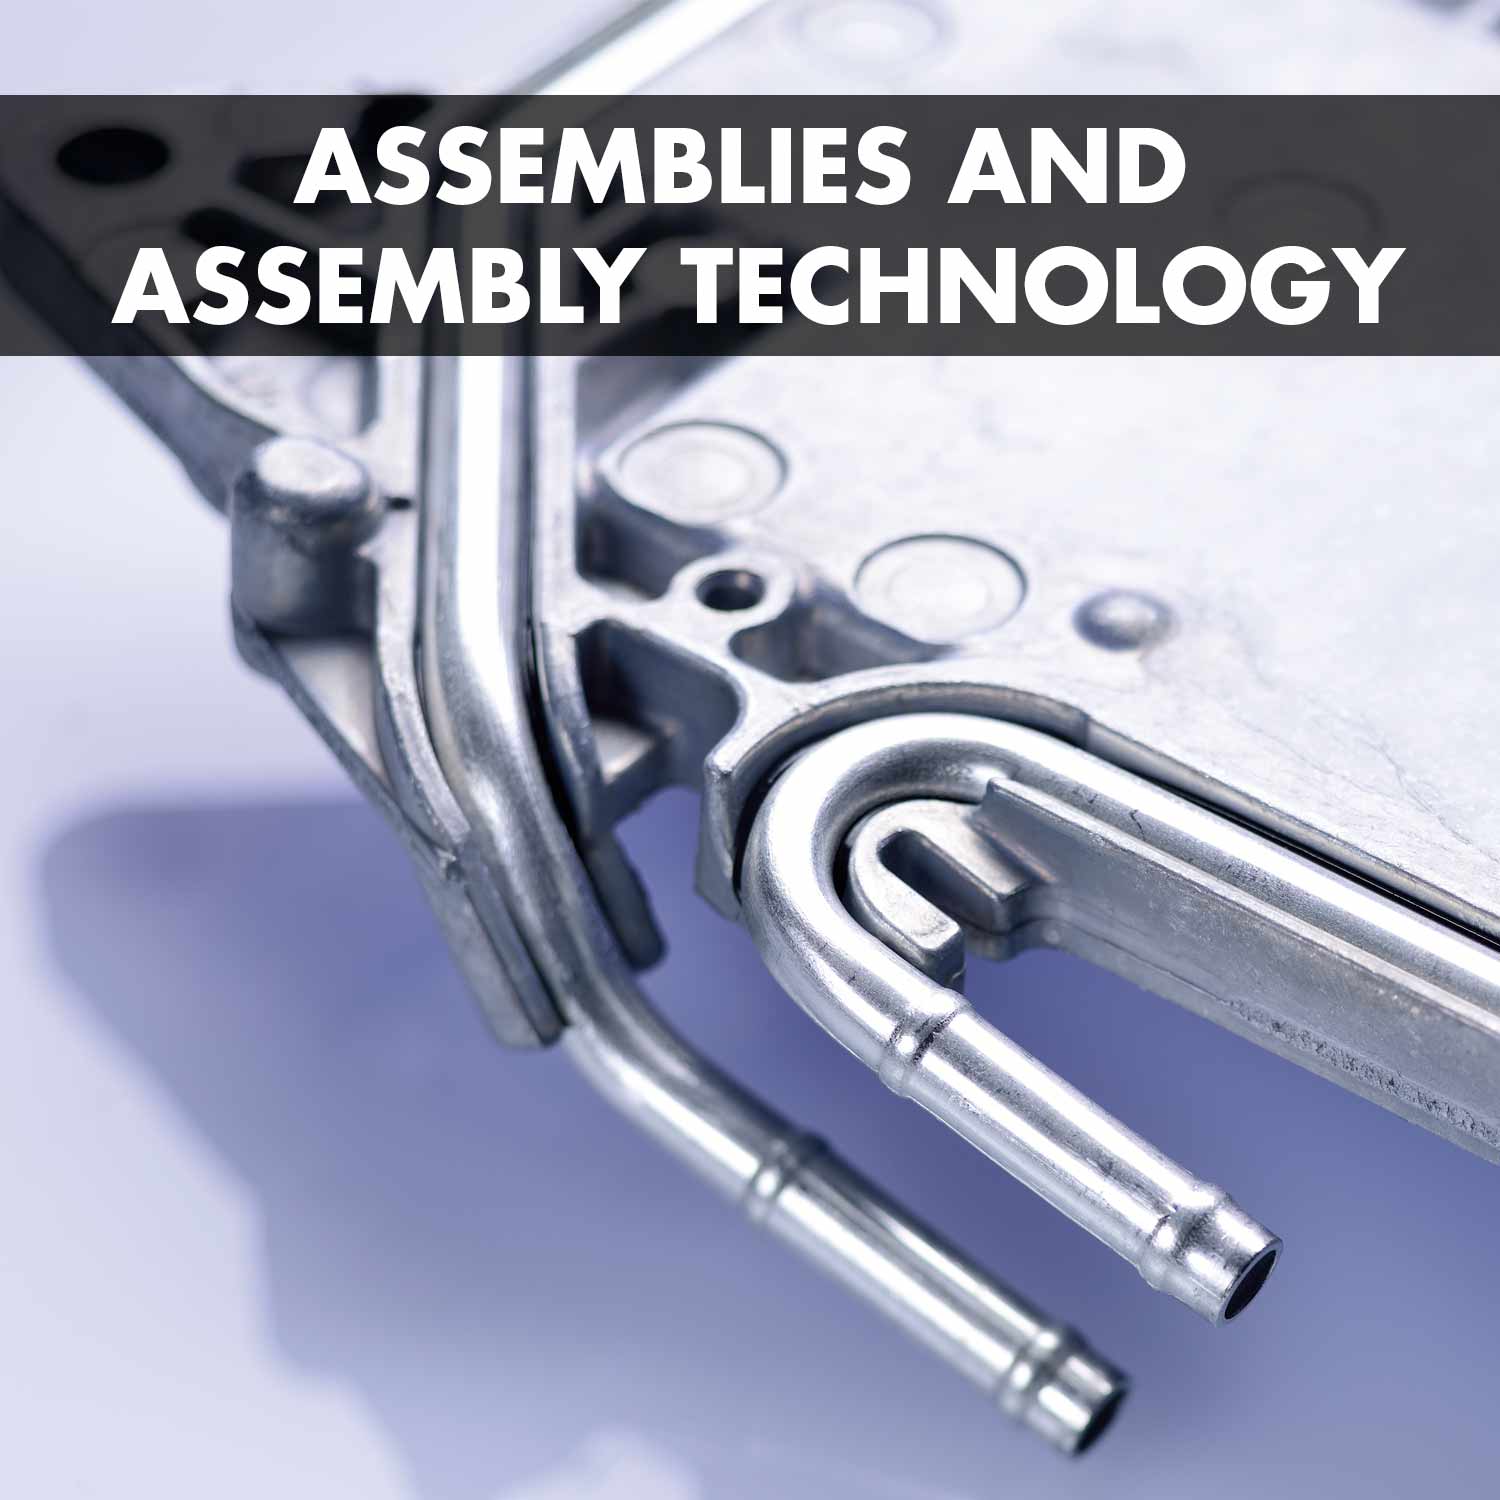 Assemblies and assembly technology